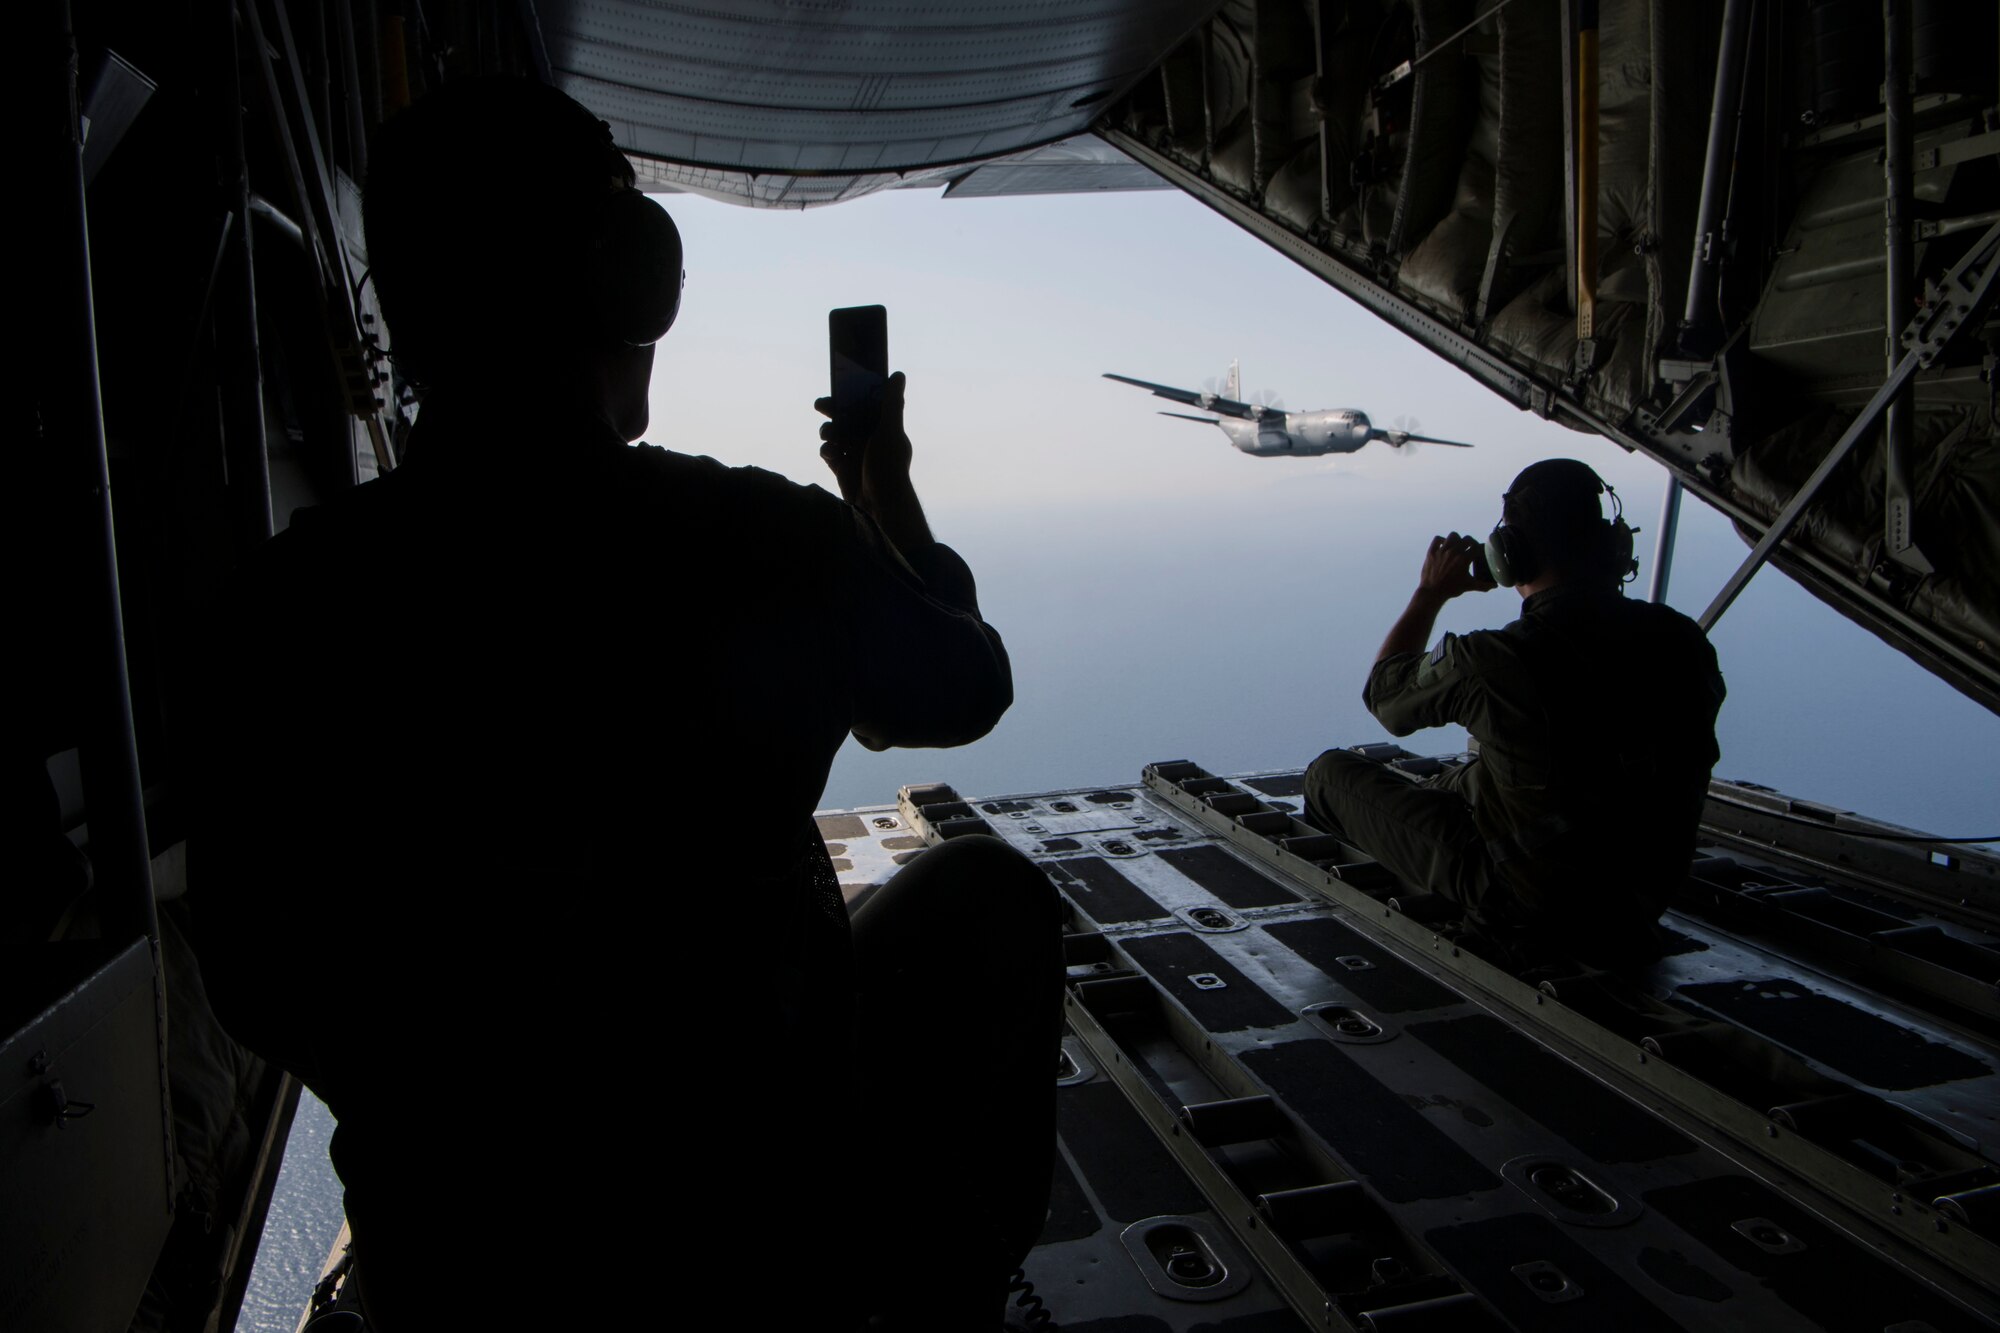 Two Hellenic air force loadmasters take photos of a U.S. Air Force C-130J Super Hercules, while riding on a Hellenic air force C-130H Hercules during an exercise Stolen Cerberus V interfly mission near Elefsis Air Base, Greece, May 10, 2018. The two aircraft flew in formation through different drop zones. (U.S. Air Force photo by Senior Airman Devin M. Rumbaugh)